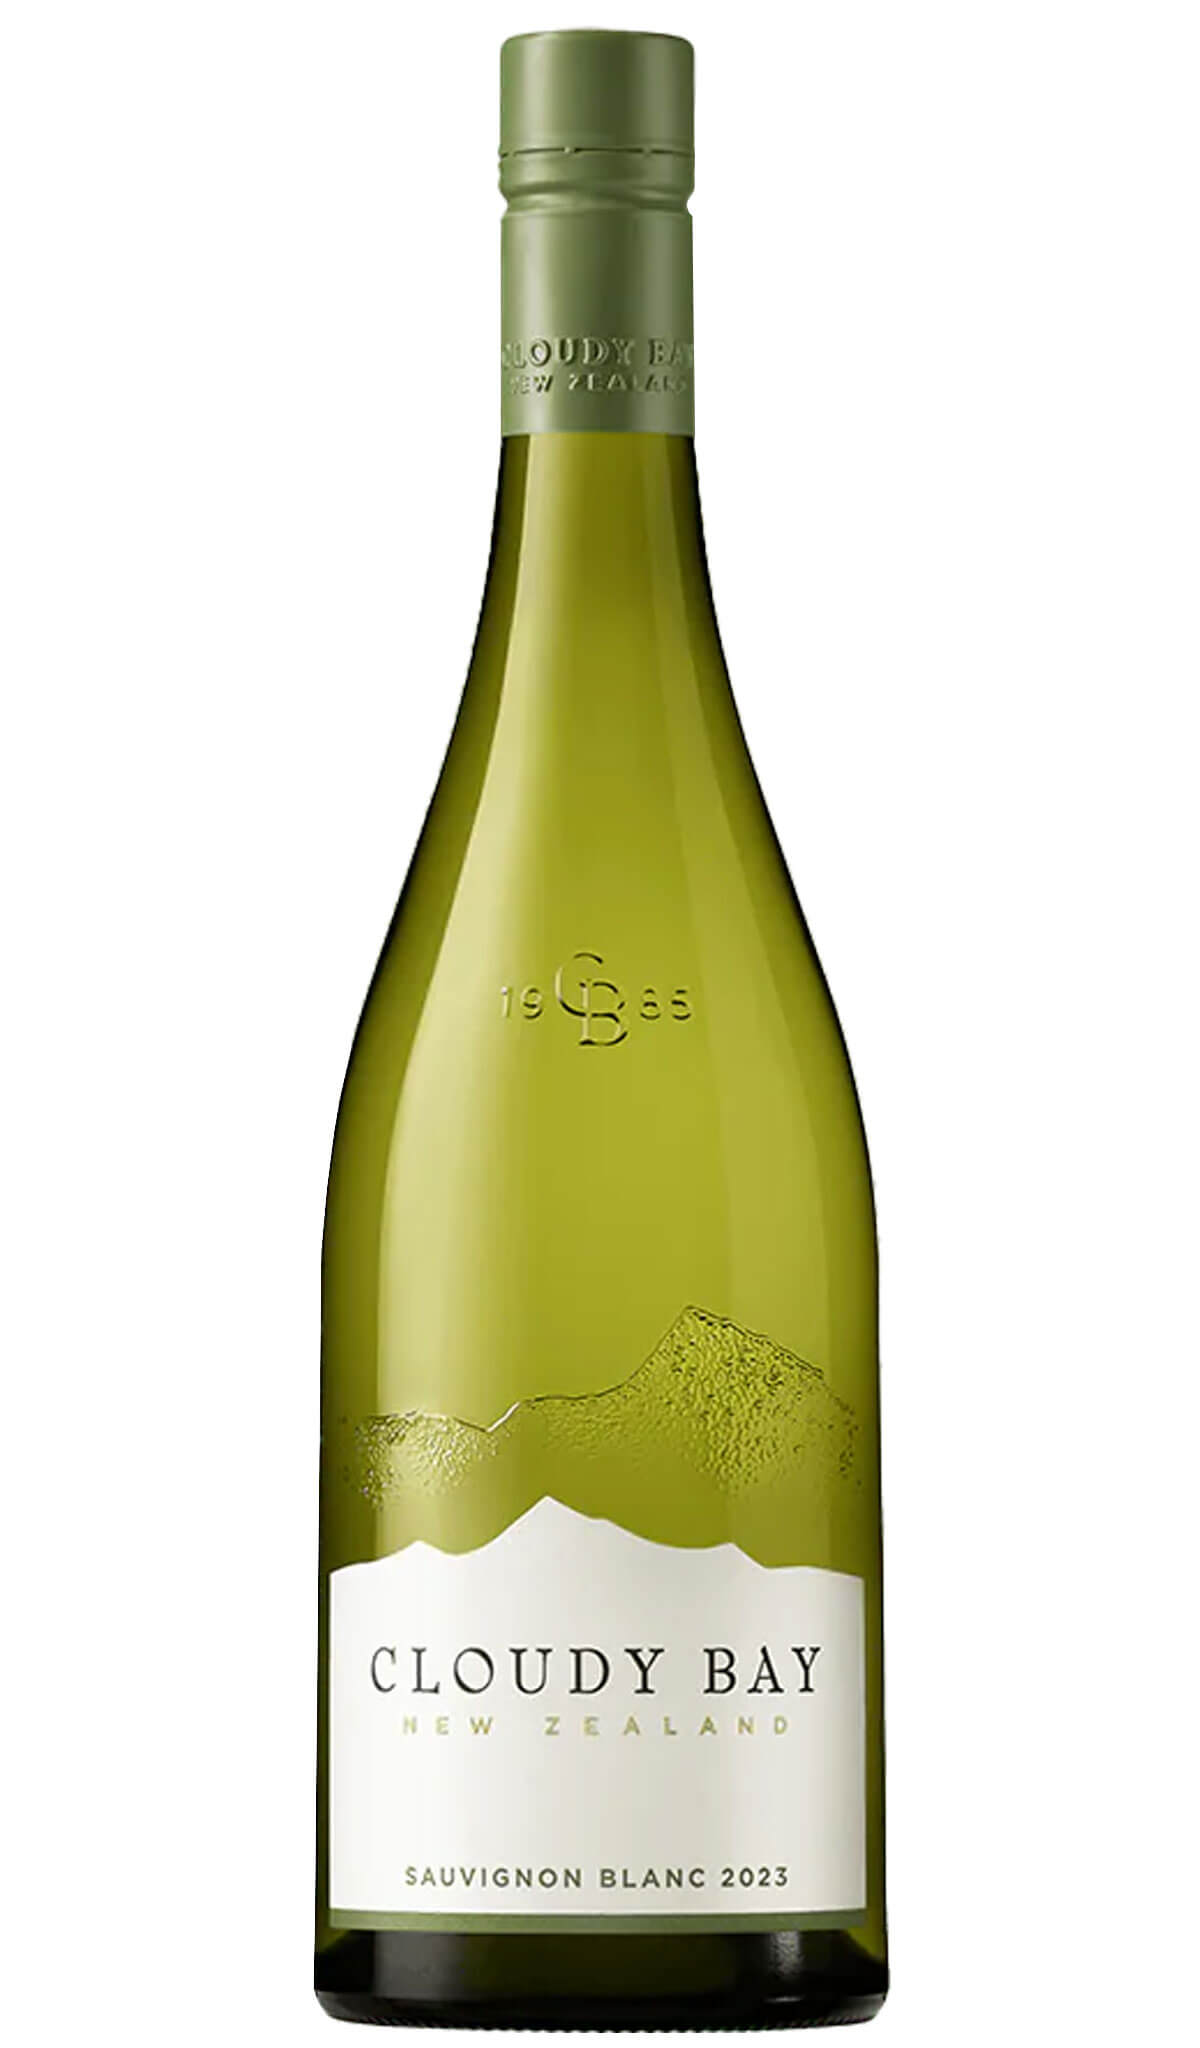 Find out more or buy Cloudy Bay Sauvignon Blanc 2023 (Marlborough) online at Wine Sellers Direct - Australia’s independent liquor specialists.